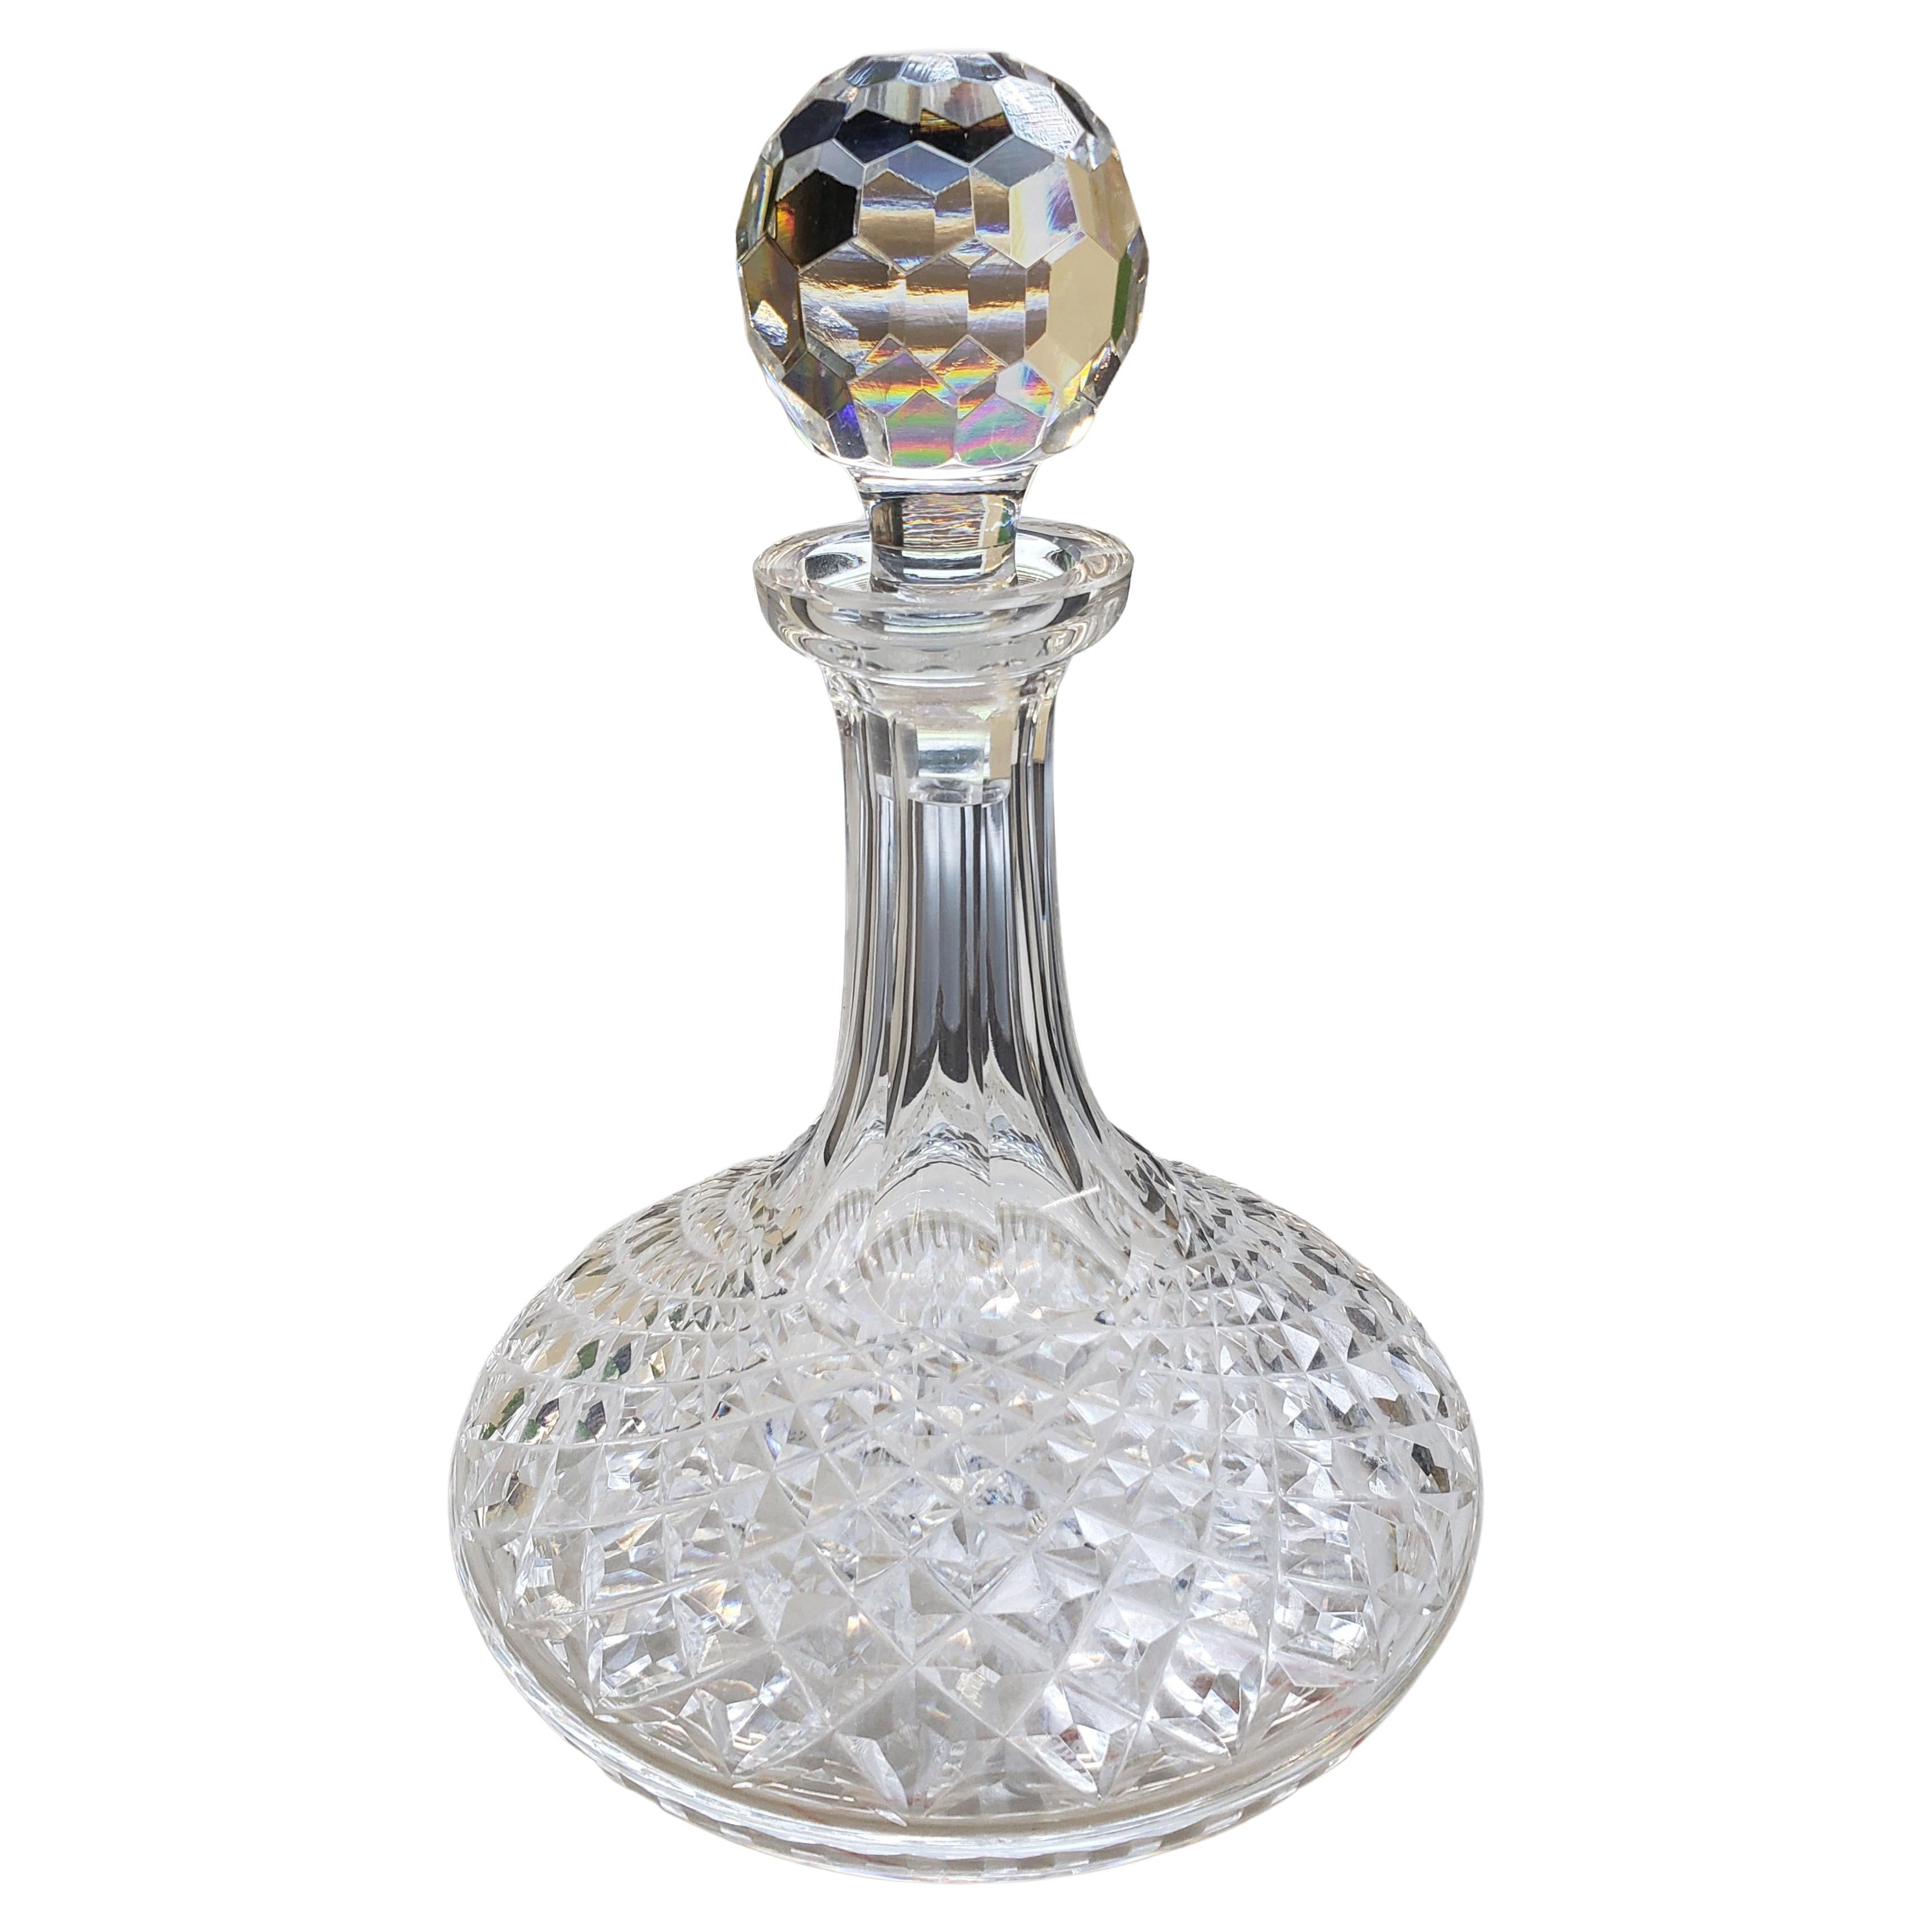 Is any Waterford crystal still made in Ireland? - Questions